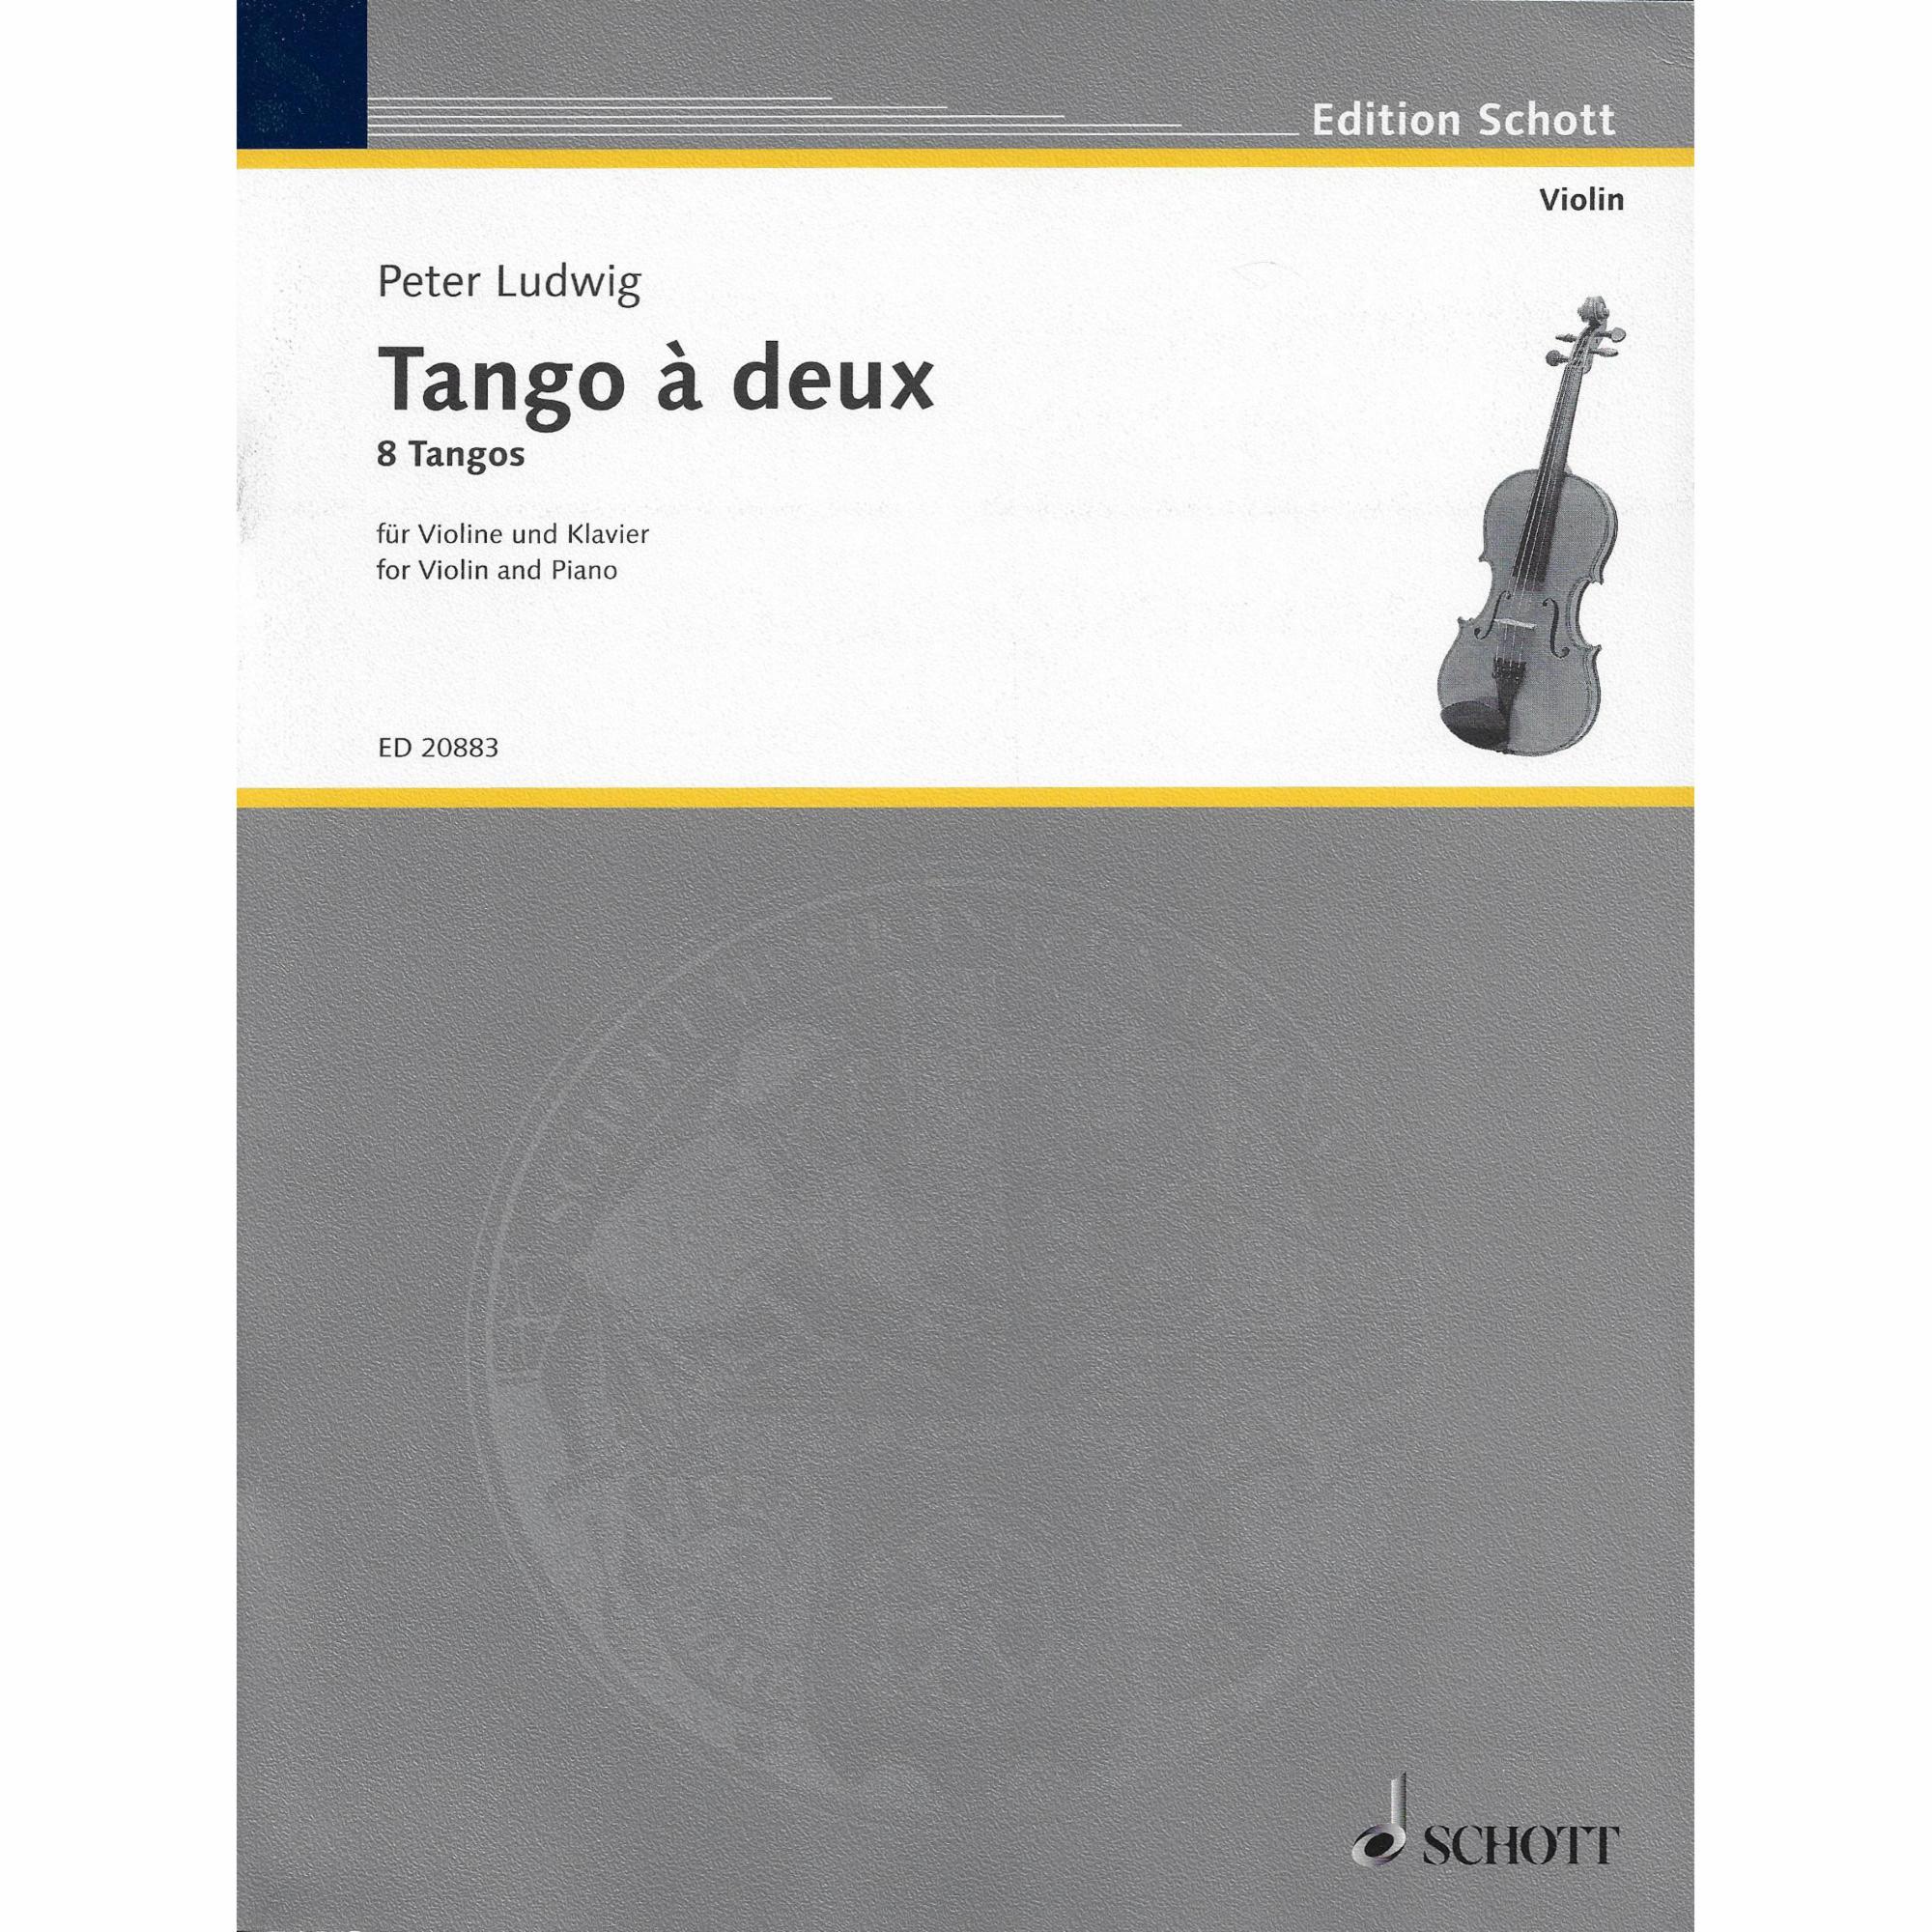 Tango a Deux for Violin and Piano